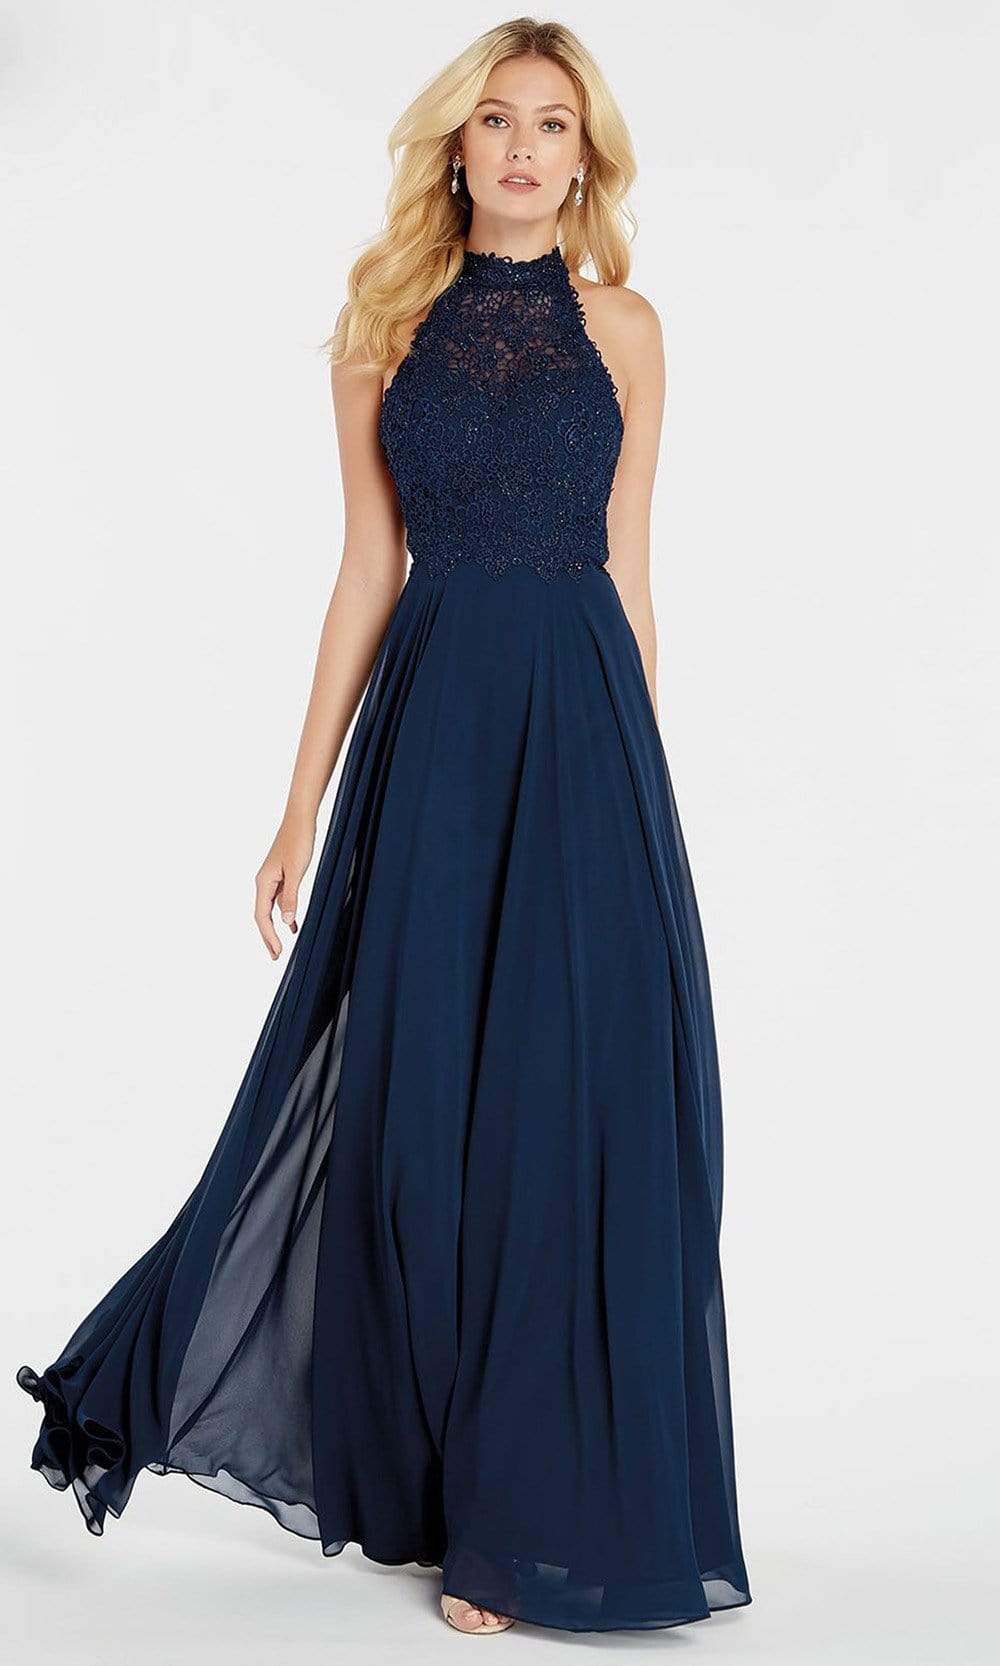 Alyce Paris - 60354 Beaded Lace Bodice Flowy Chiffon Evening Gown Bridesmaid Dresses 000 / Navy